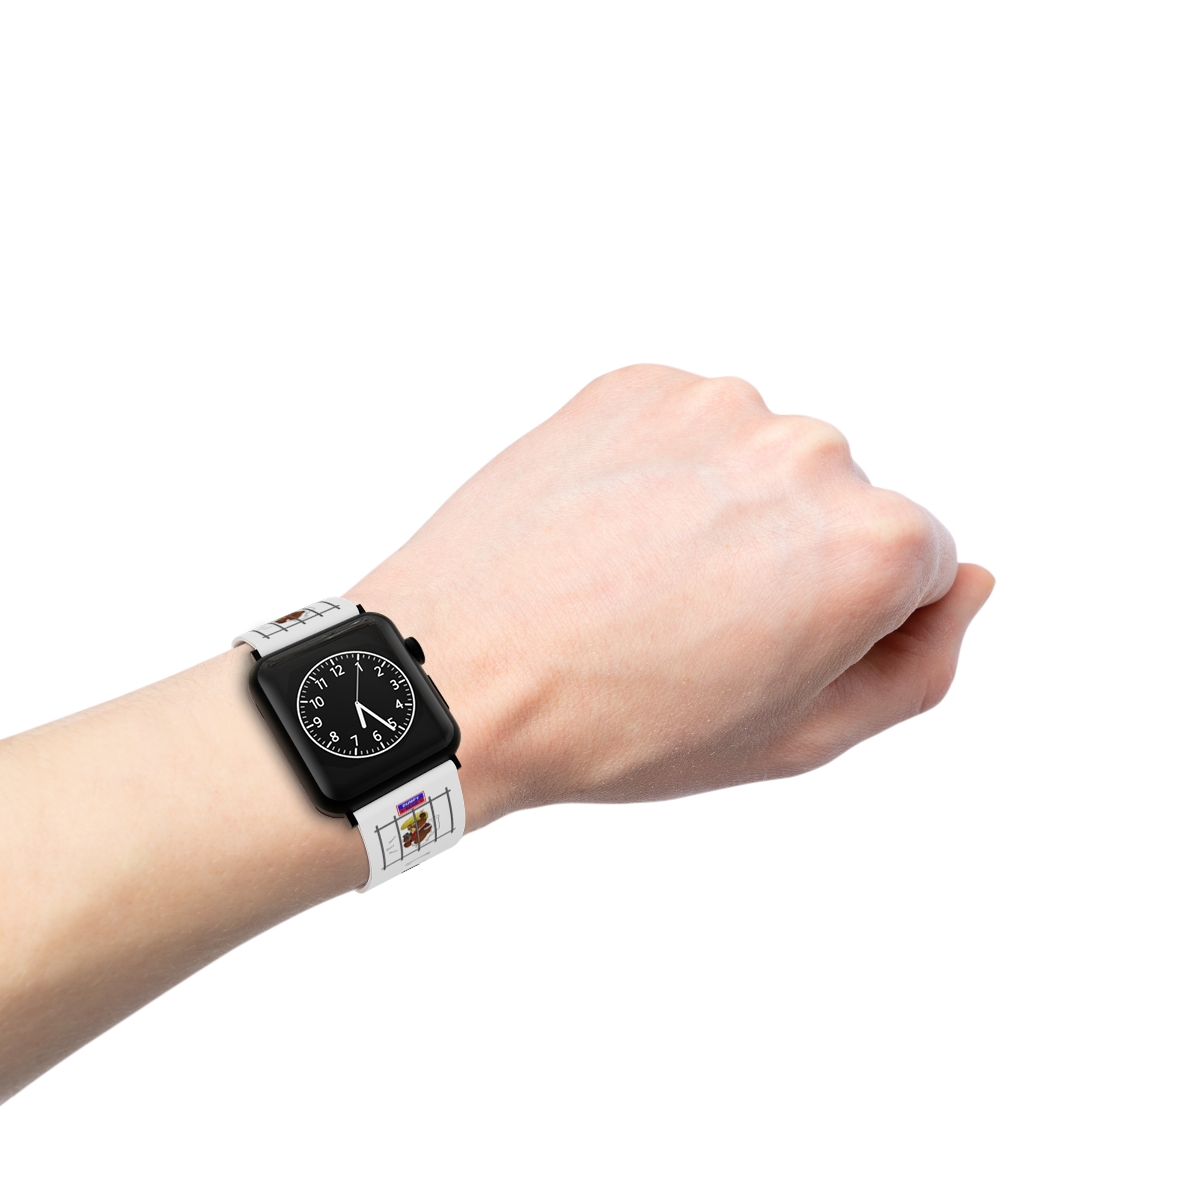 Dumpy Bear Tweeting on Toilet Behind Bars - Watch Band for Apple Watch product thumbnail image